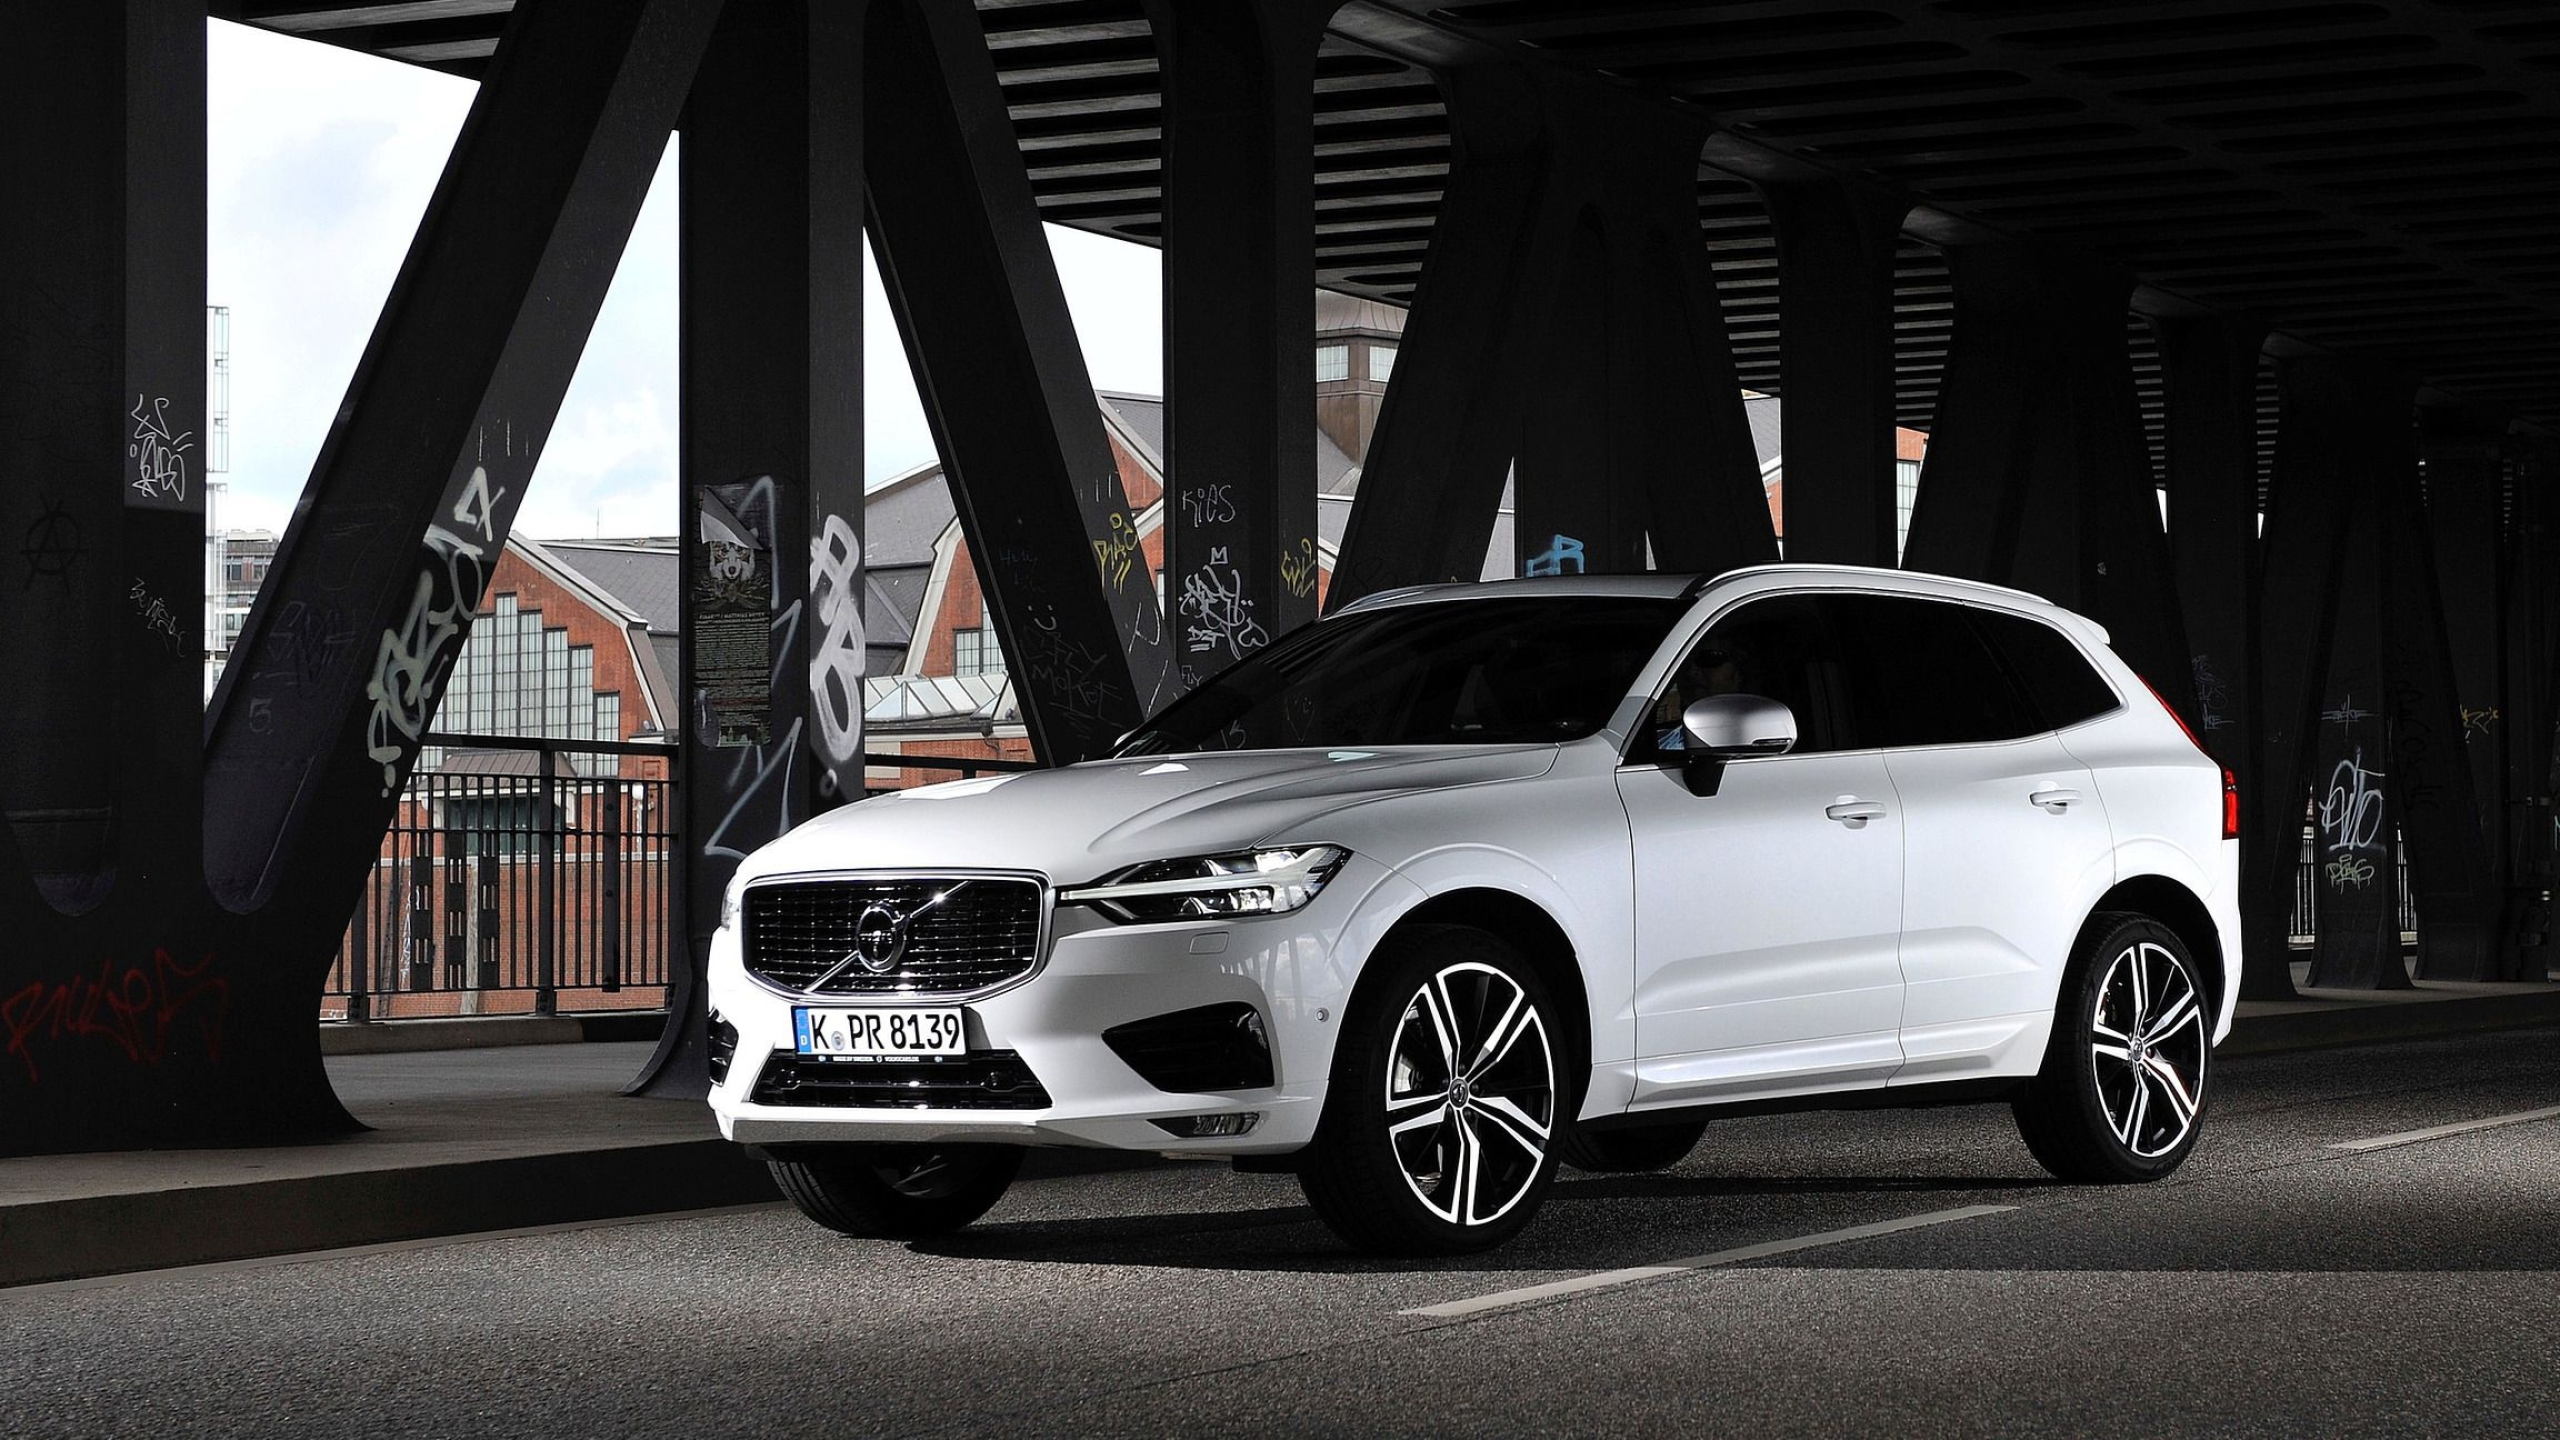 Volvo XC60, Pickootech review, Expert analysis, In-depth insights, 2560x1440 HD Desktop